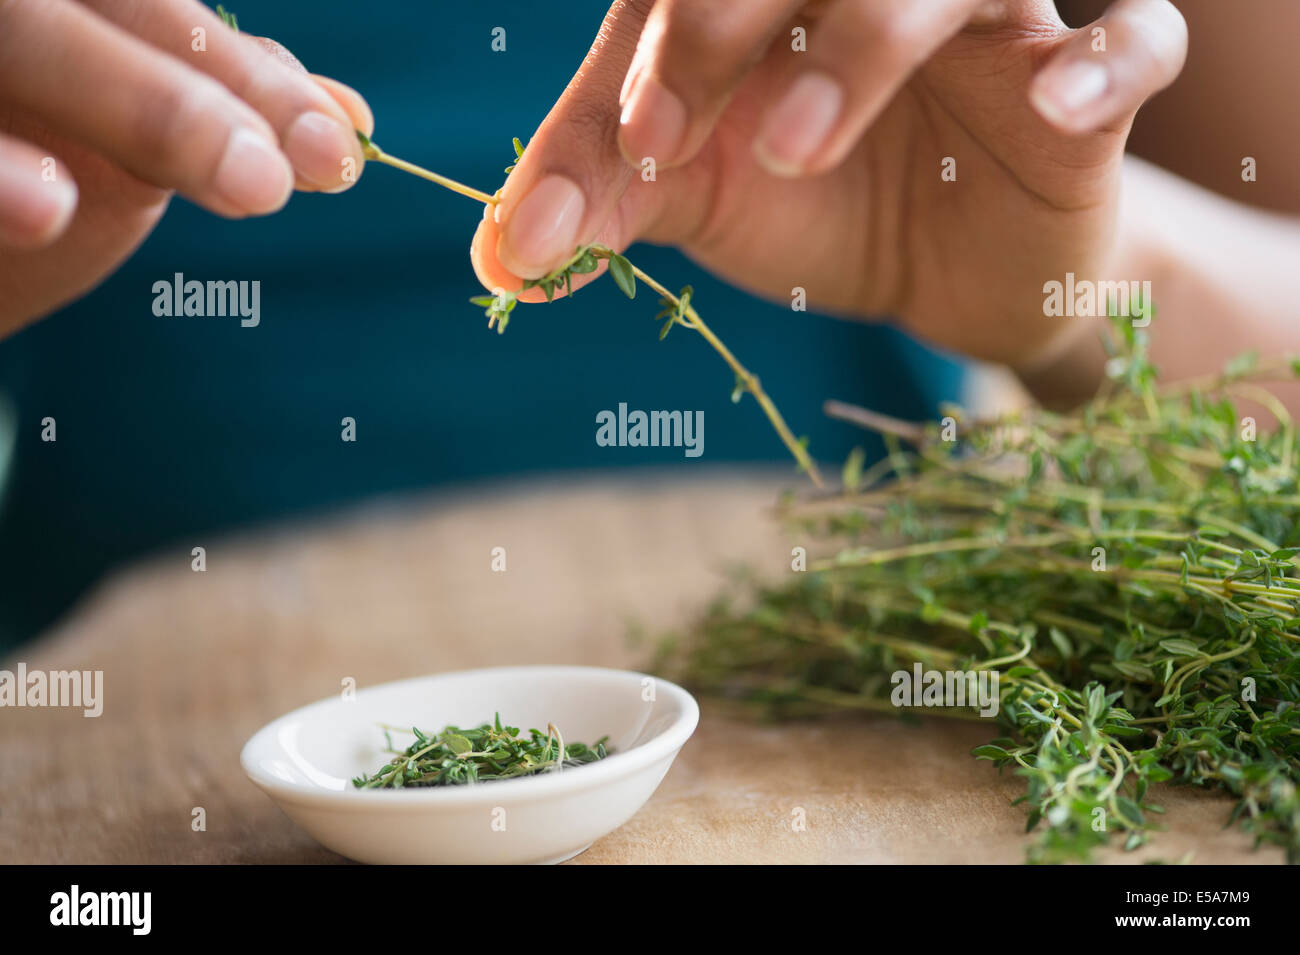 Mixed race woman trimming herbs Stock Photo